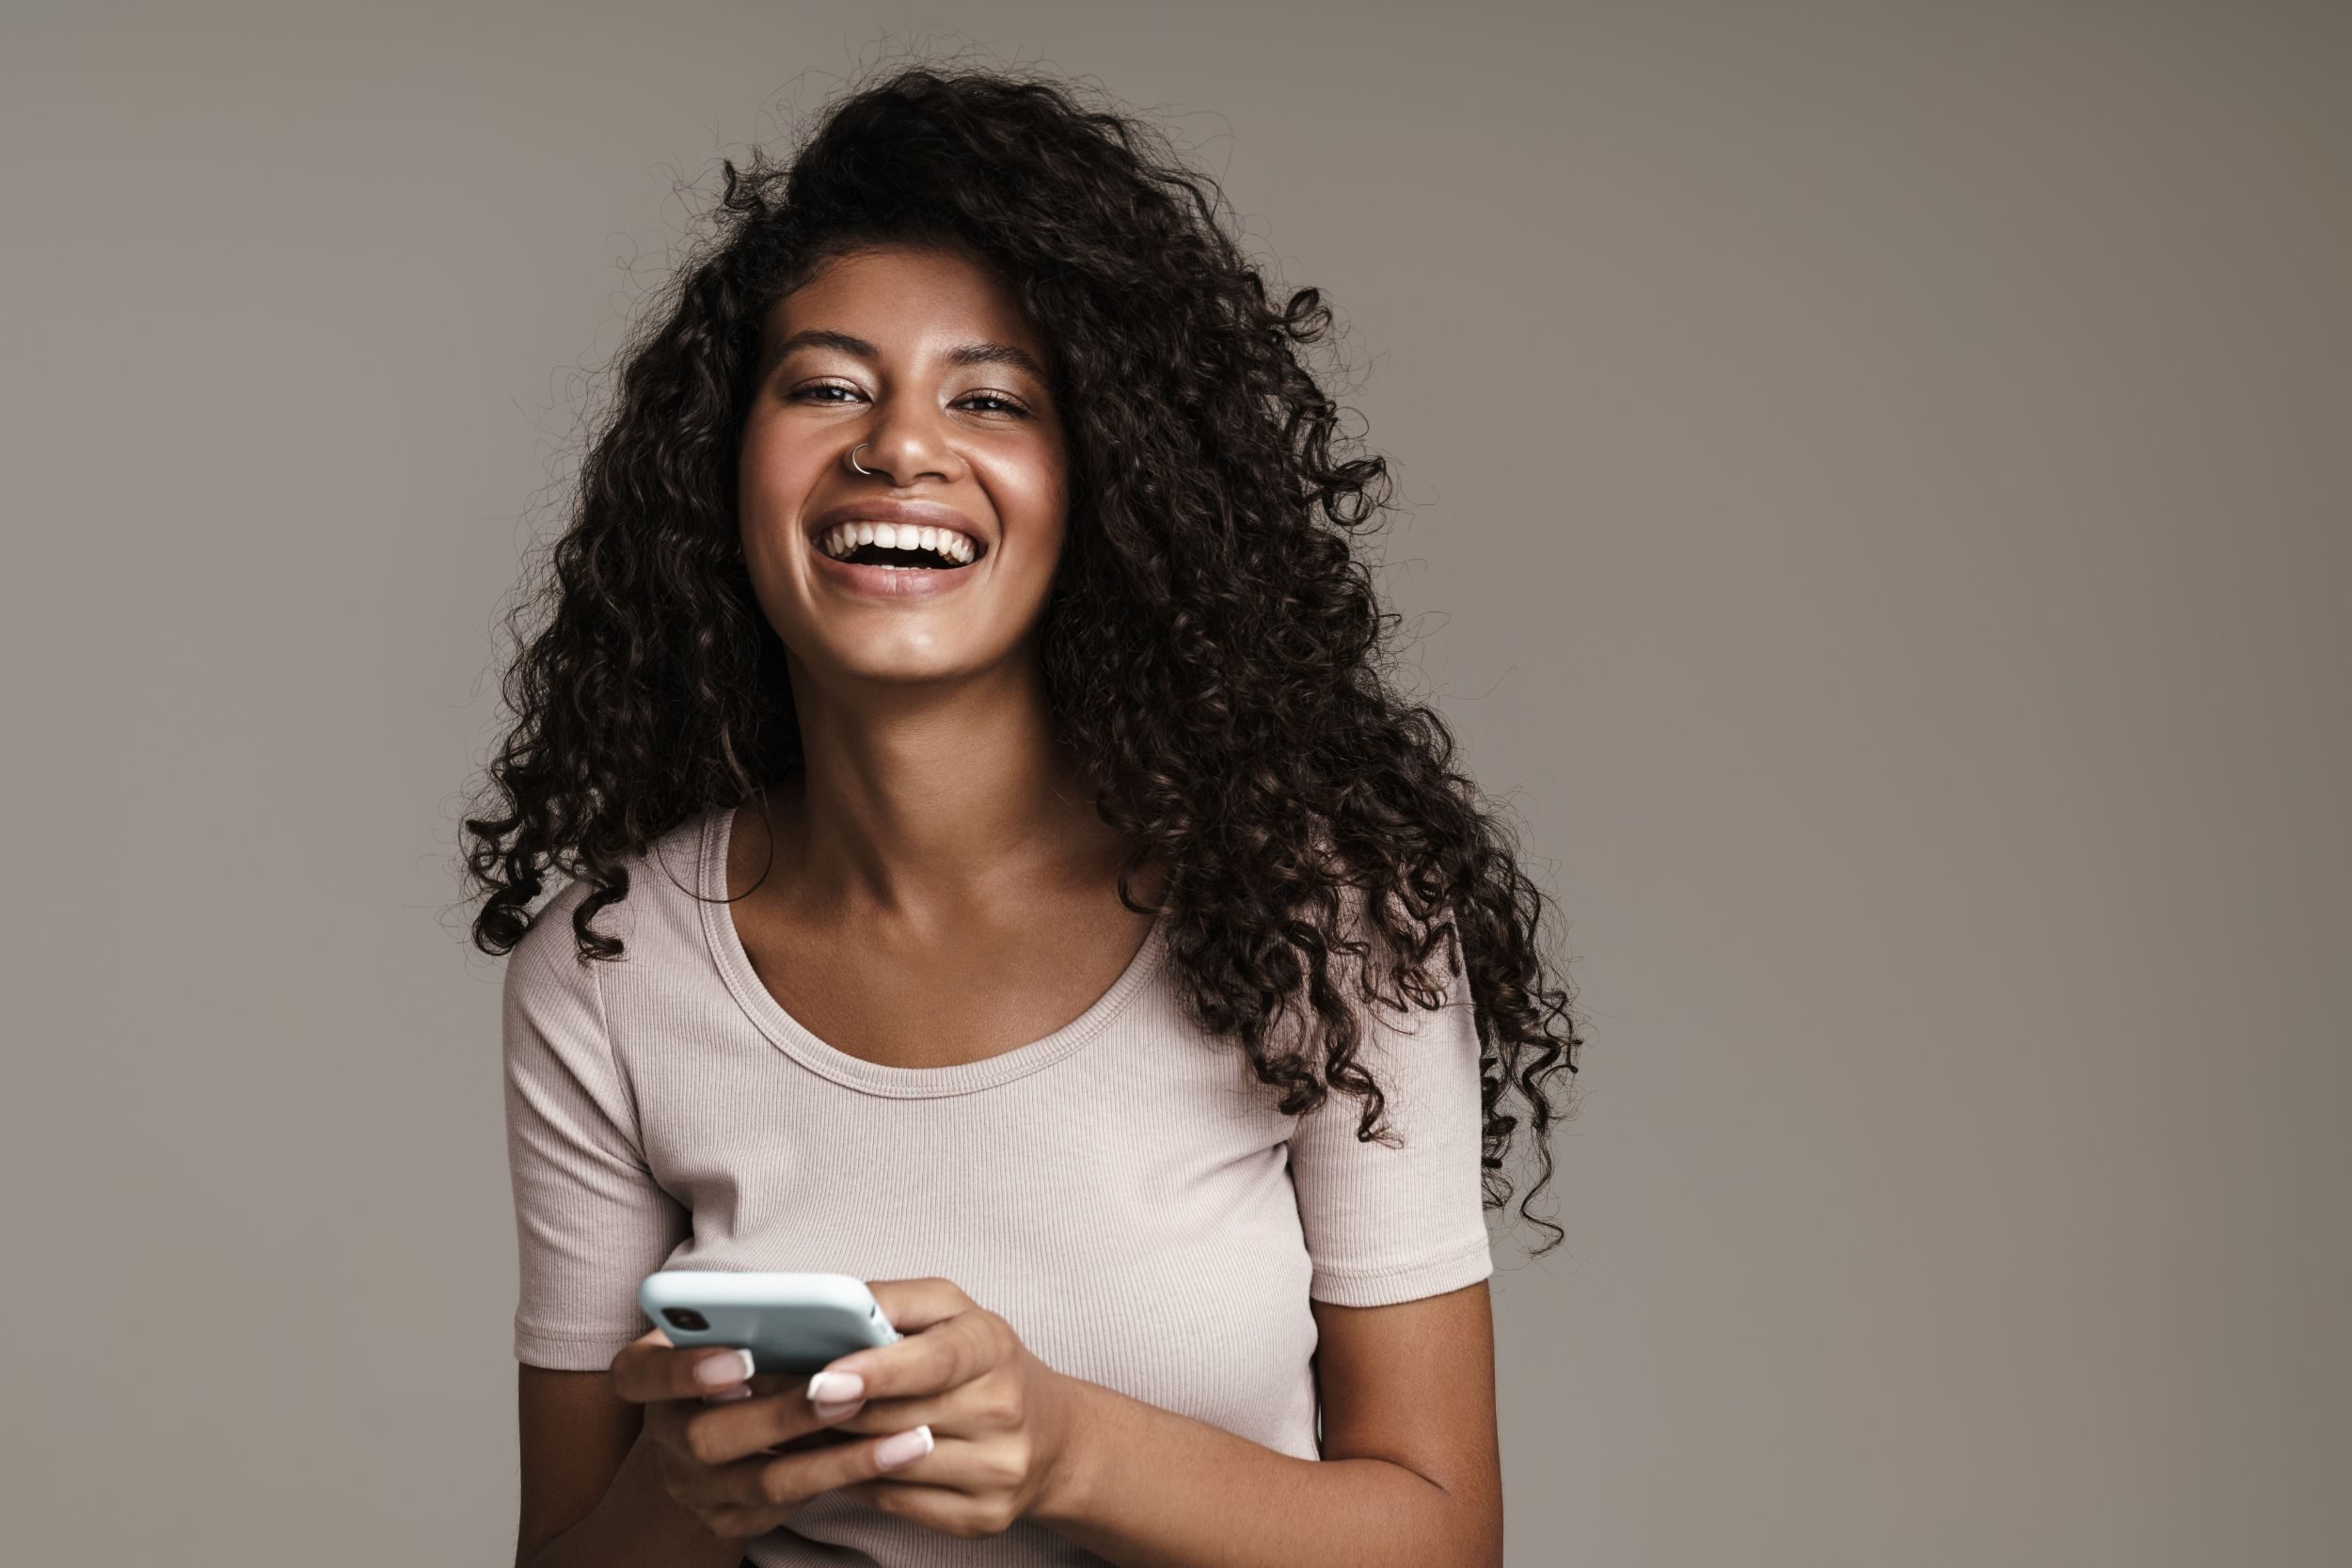 A woman texting and smiling at the camera